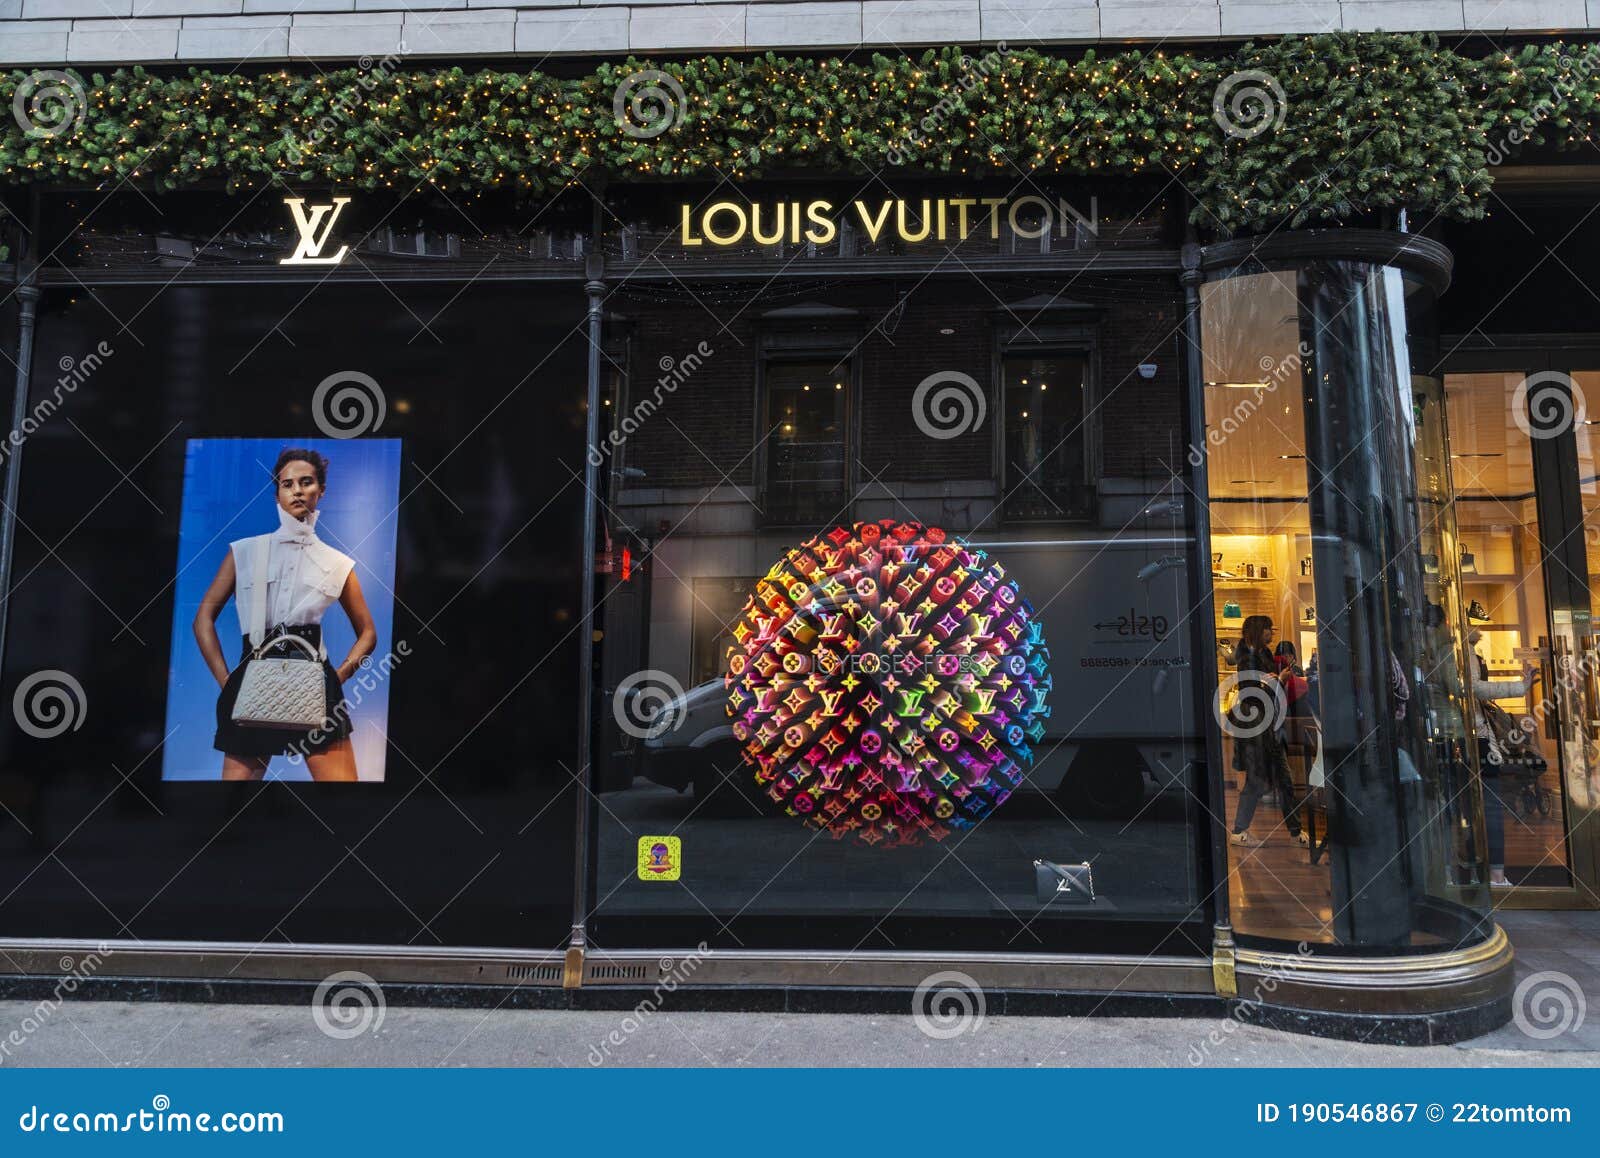 Louis Vuitton Clothing in Dublin, Ireland Editorial Photography - Image of people, clothes: 190546867